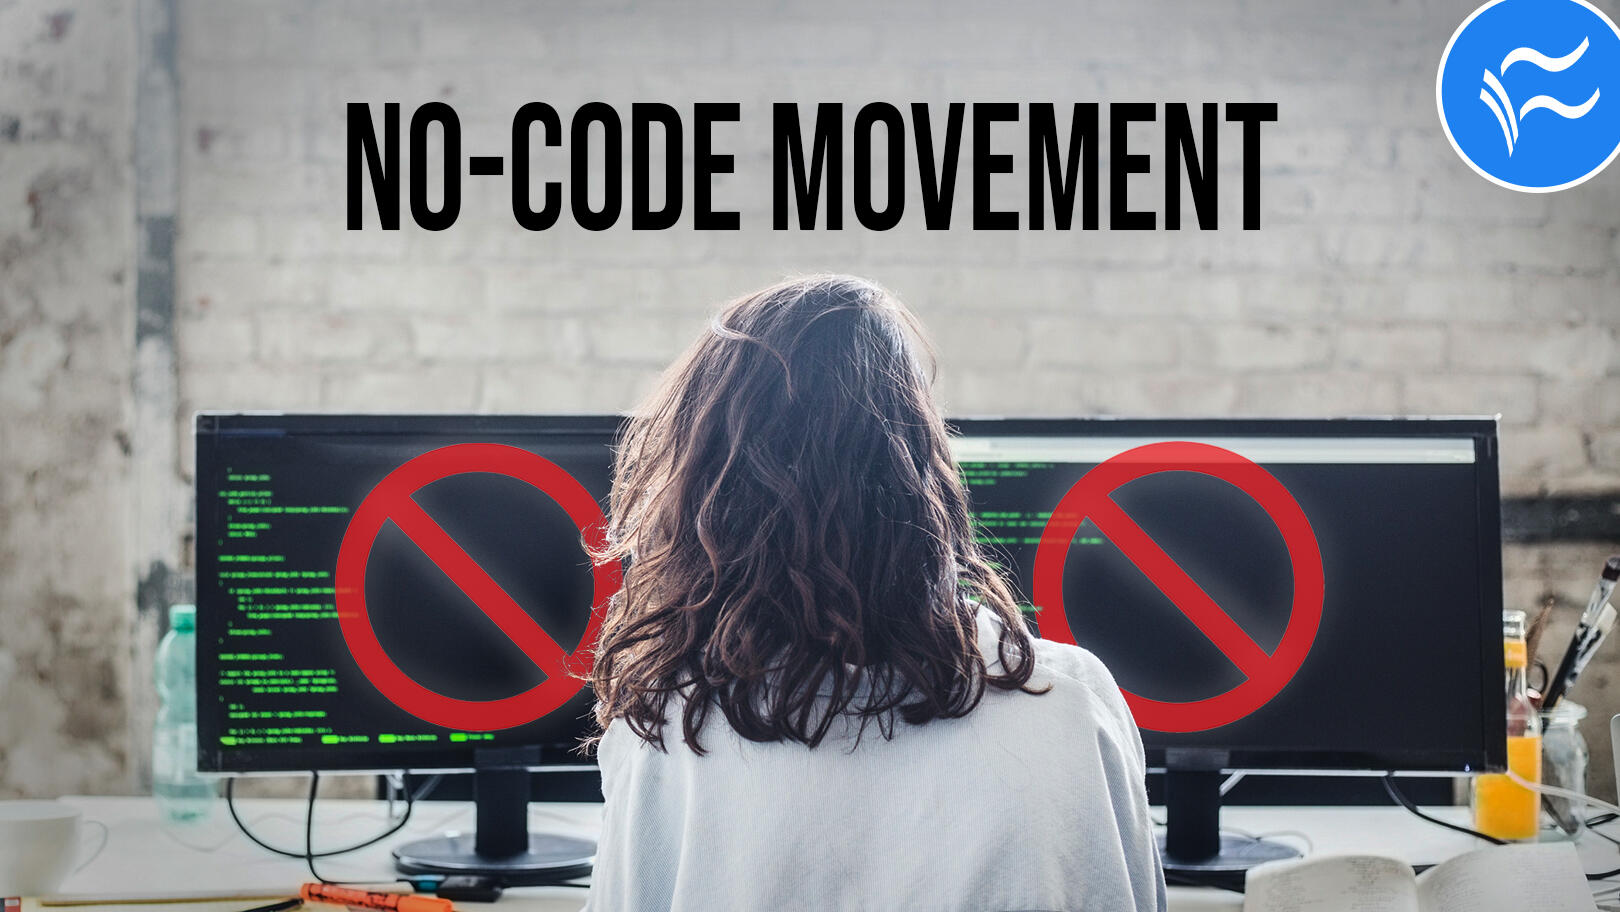 The no-code movement is in the early stages but will bring exciting new  possibilities, expert says - TechRepublic